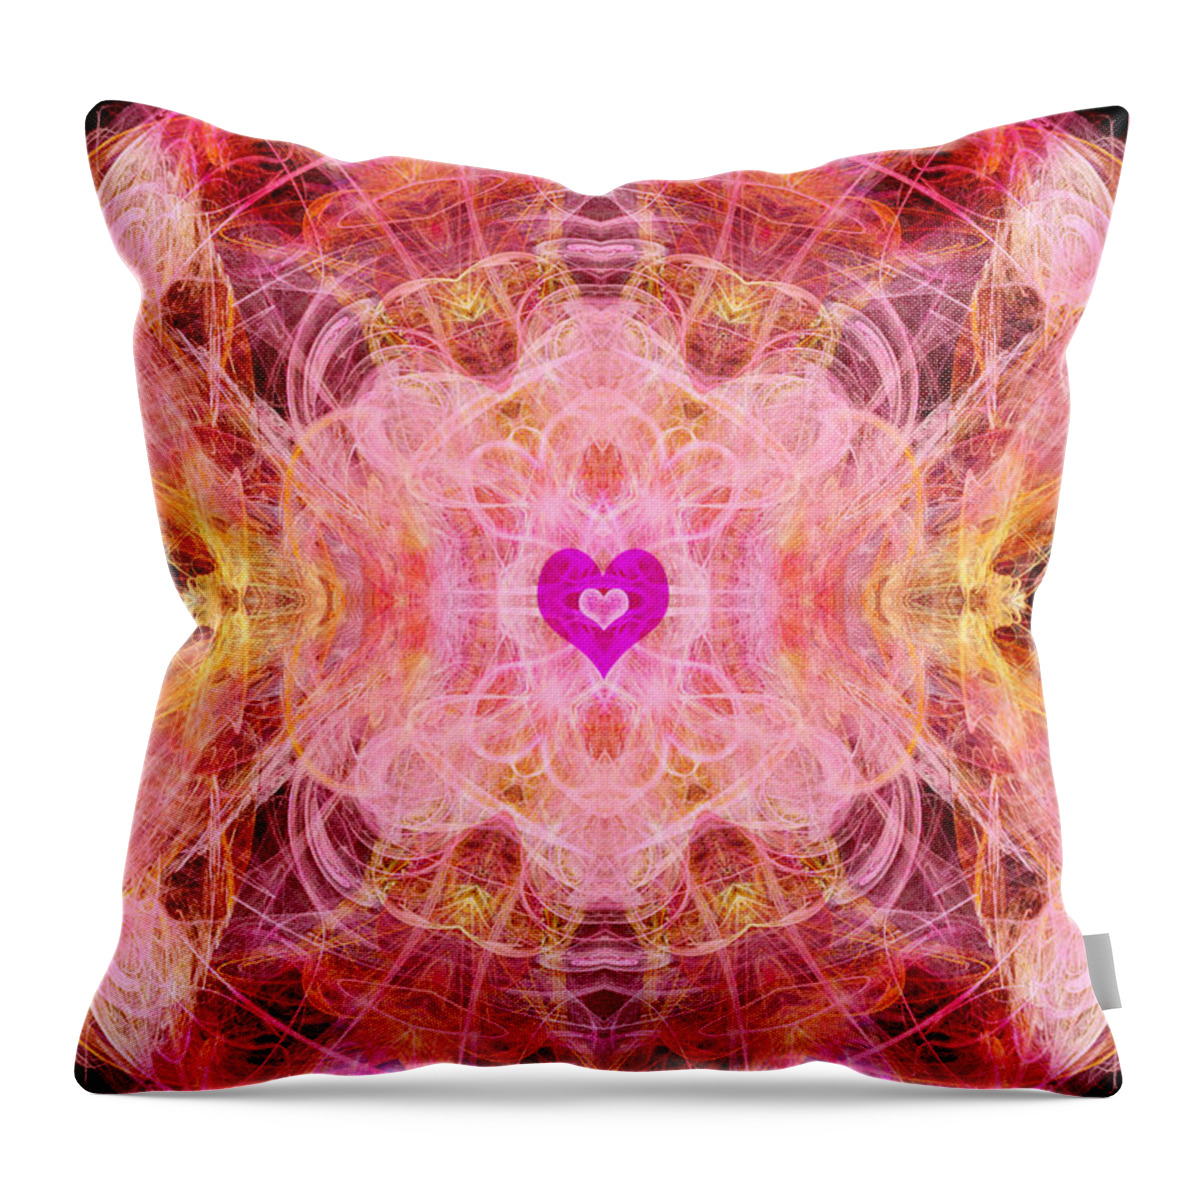 Angel Throw Pillow featuring the digital art Archangel Chamuel #1 by Diana Haronis